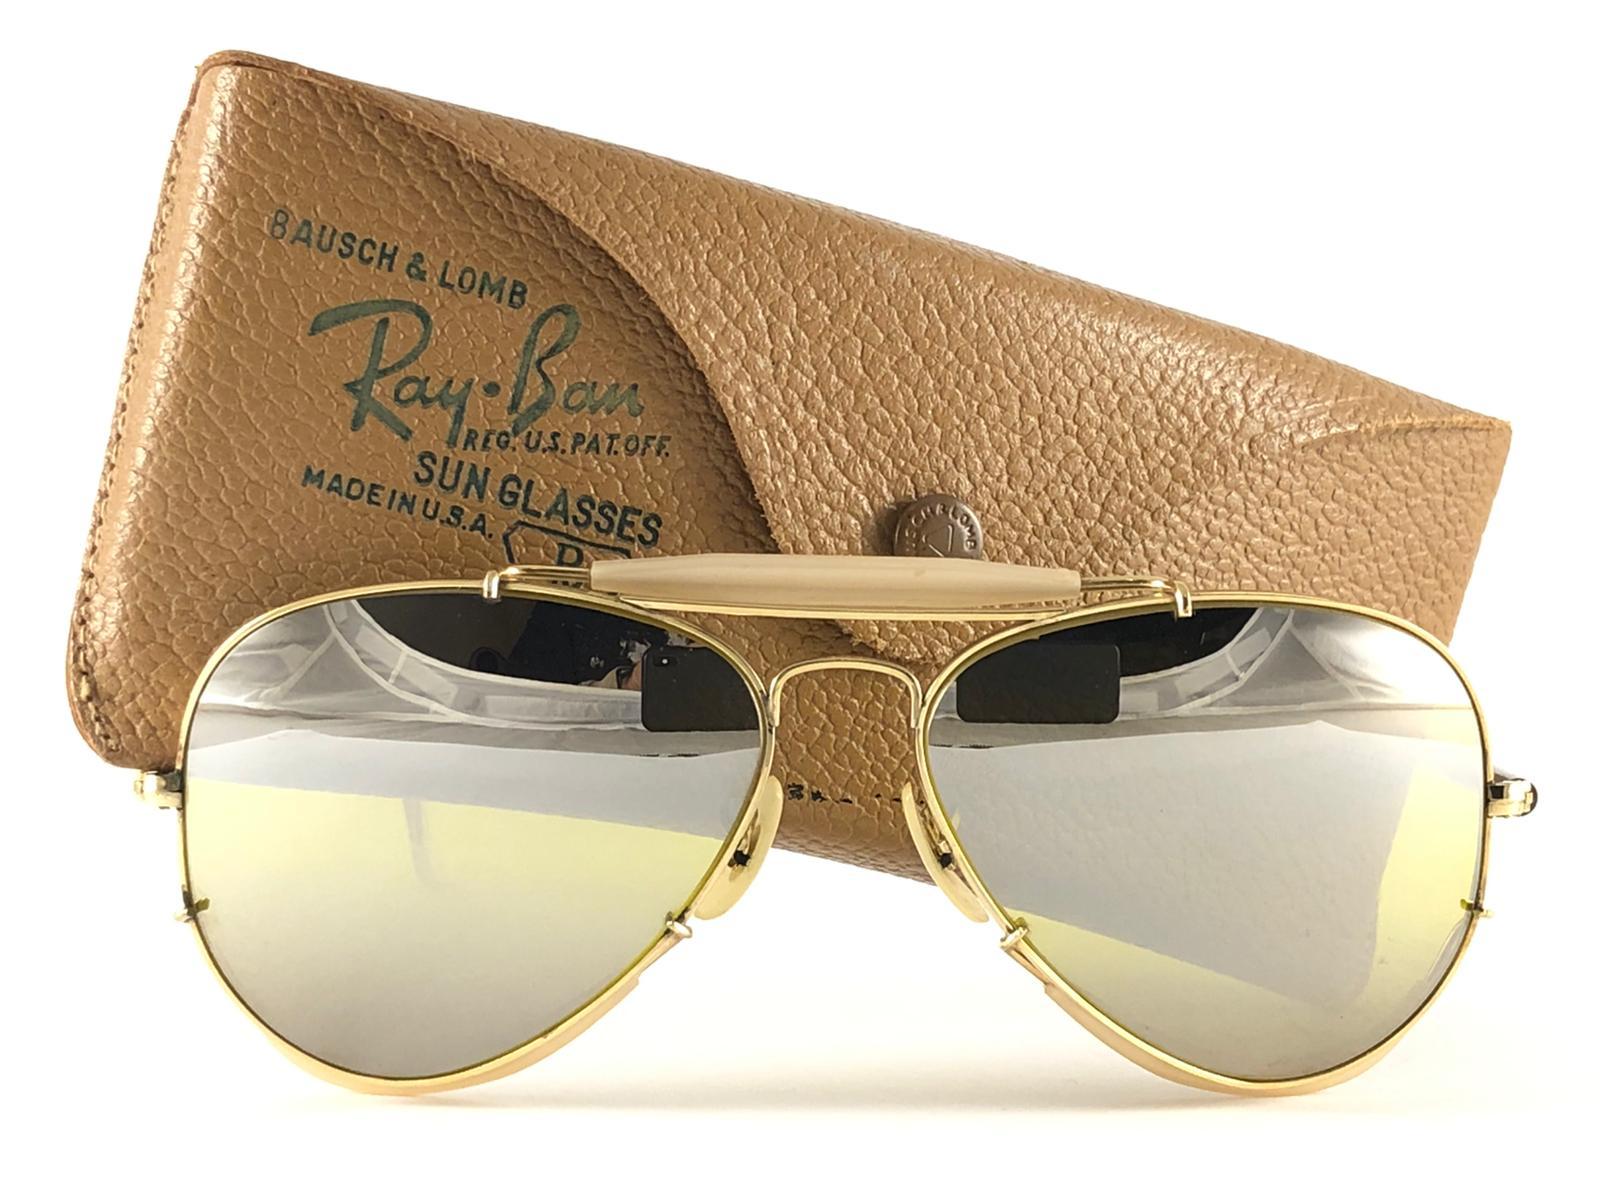 New Ray Ban Deep Freeze 12K Gold Kalichrome Collectors Item USA Sunglasses In Excellent Condition For Sale In Baleares, Baleares